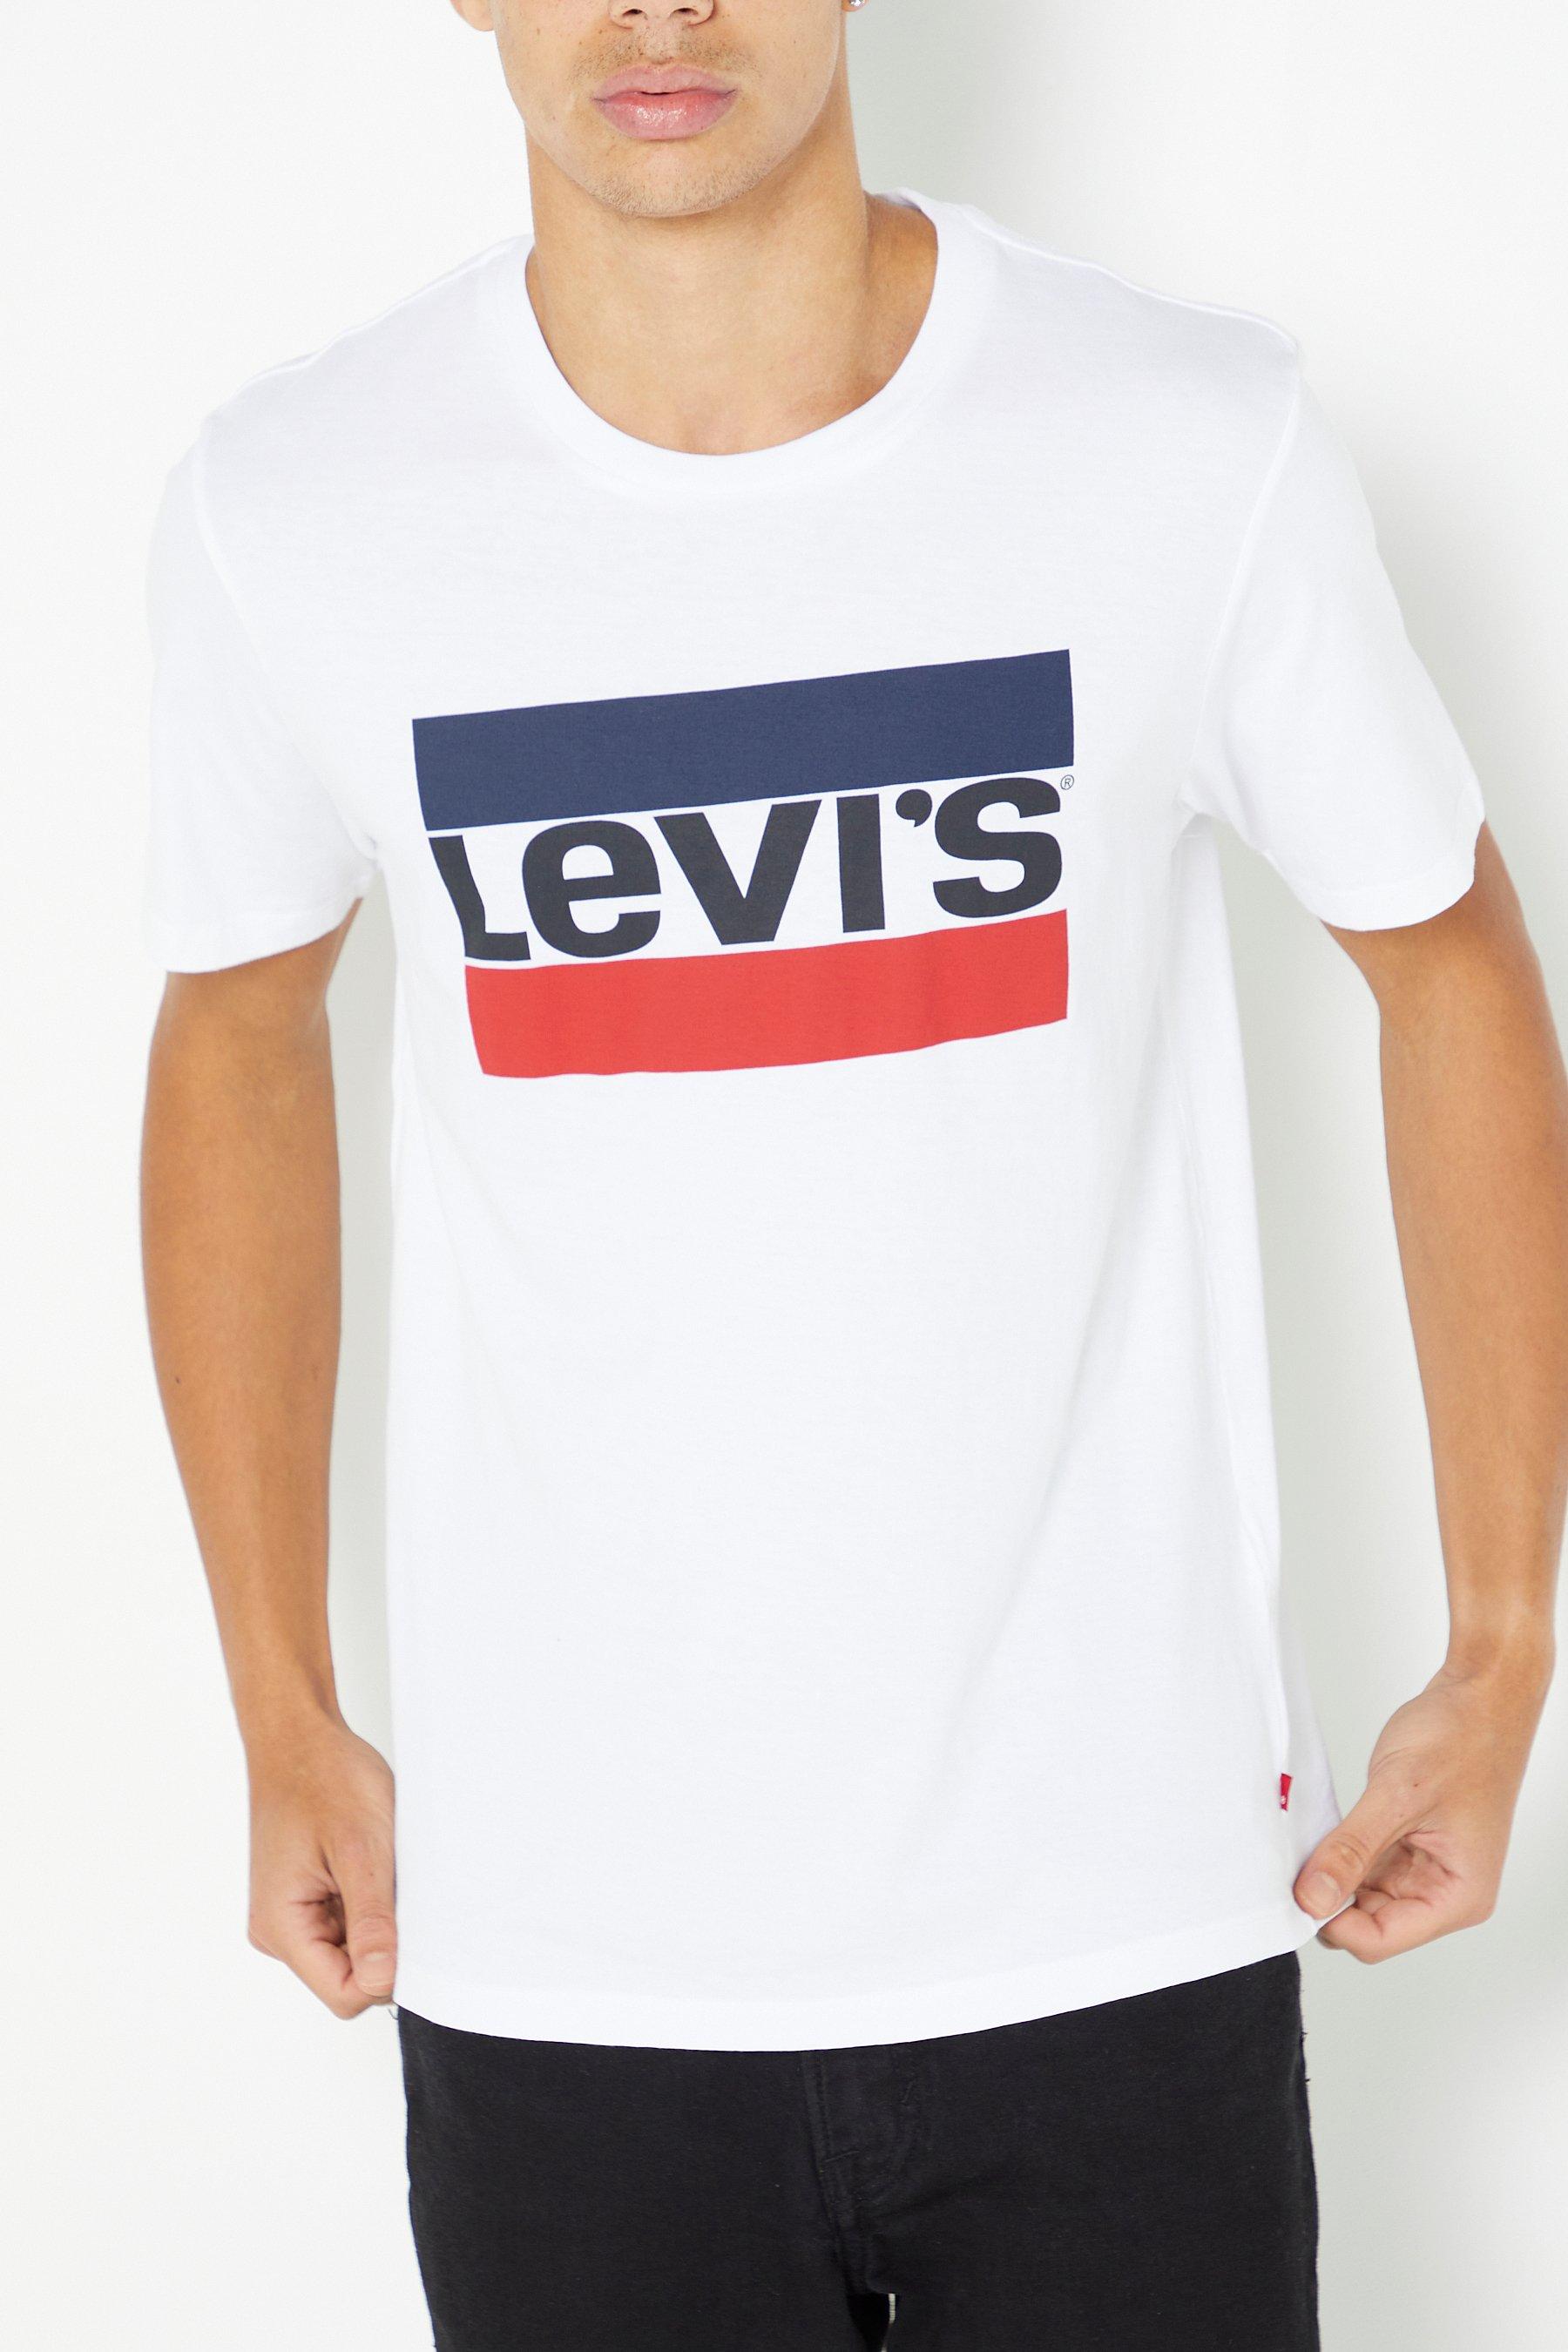 levis sportswear white graphic t-shirt - mens - size: small